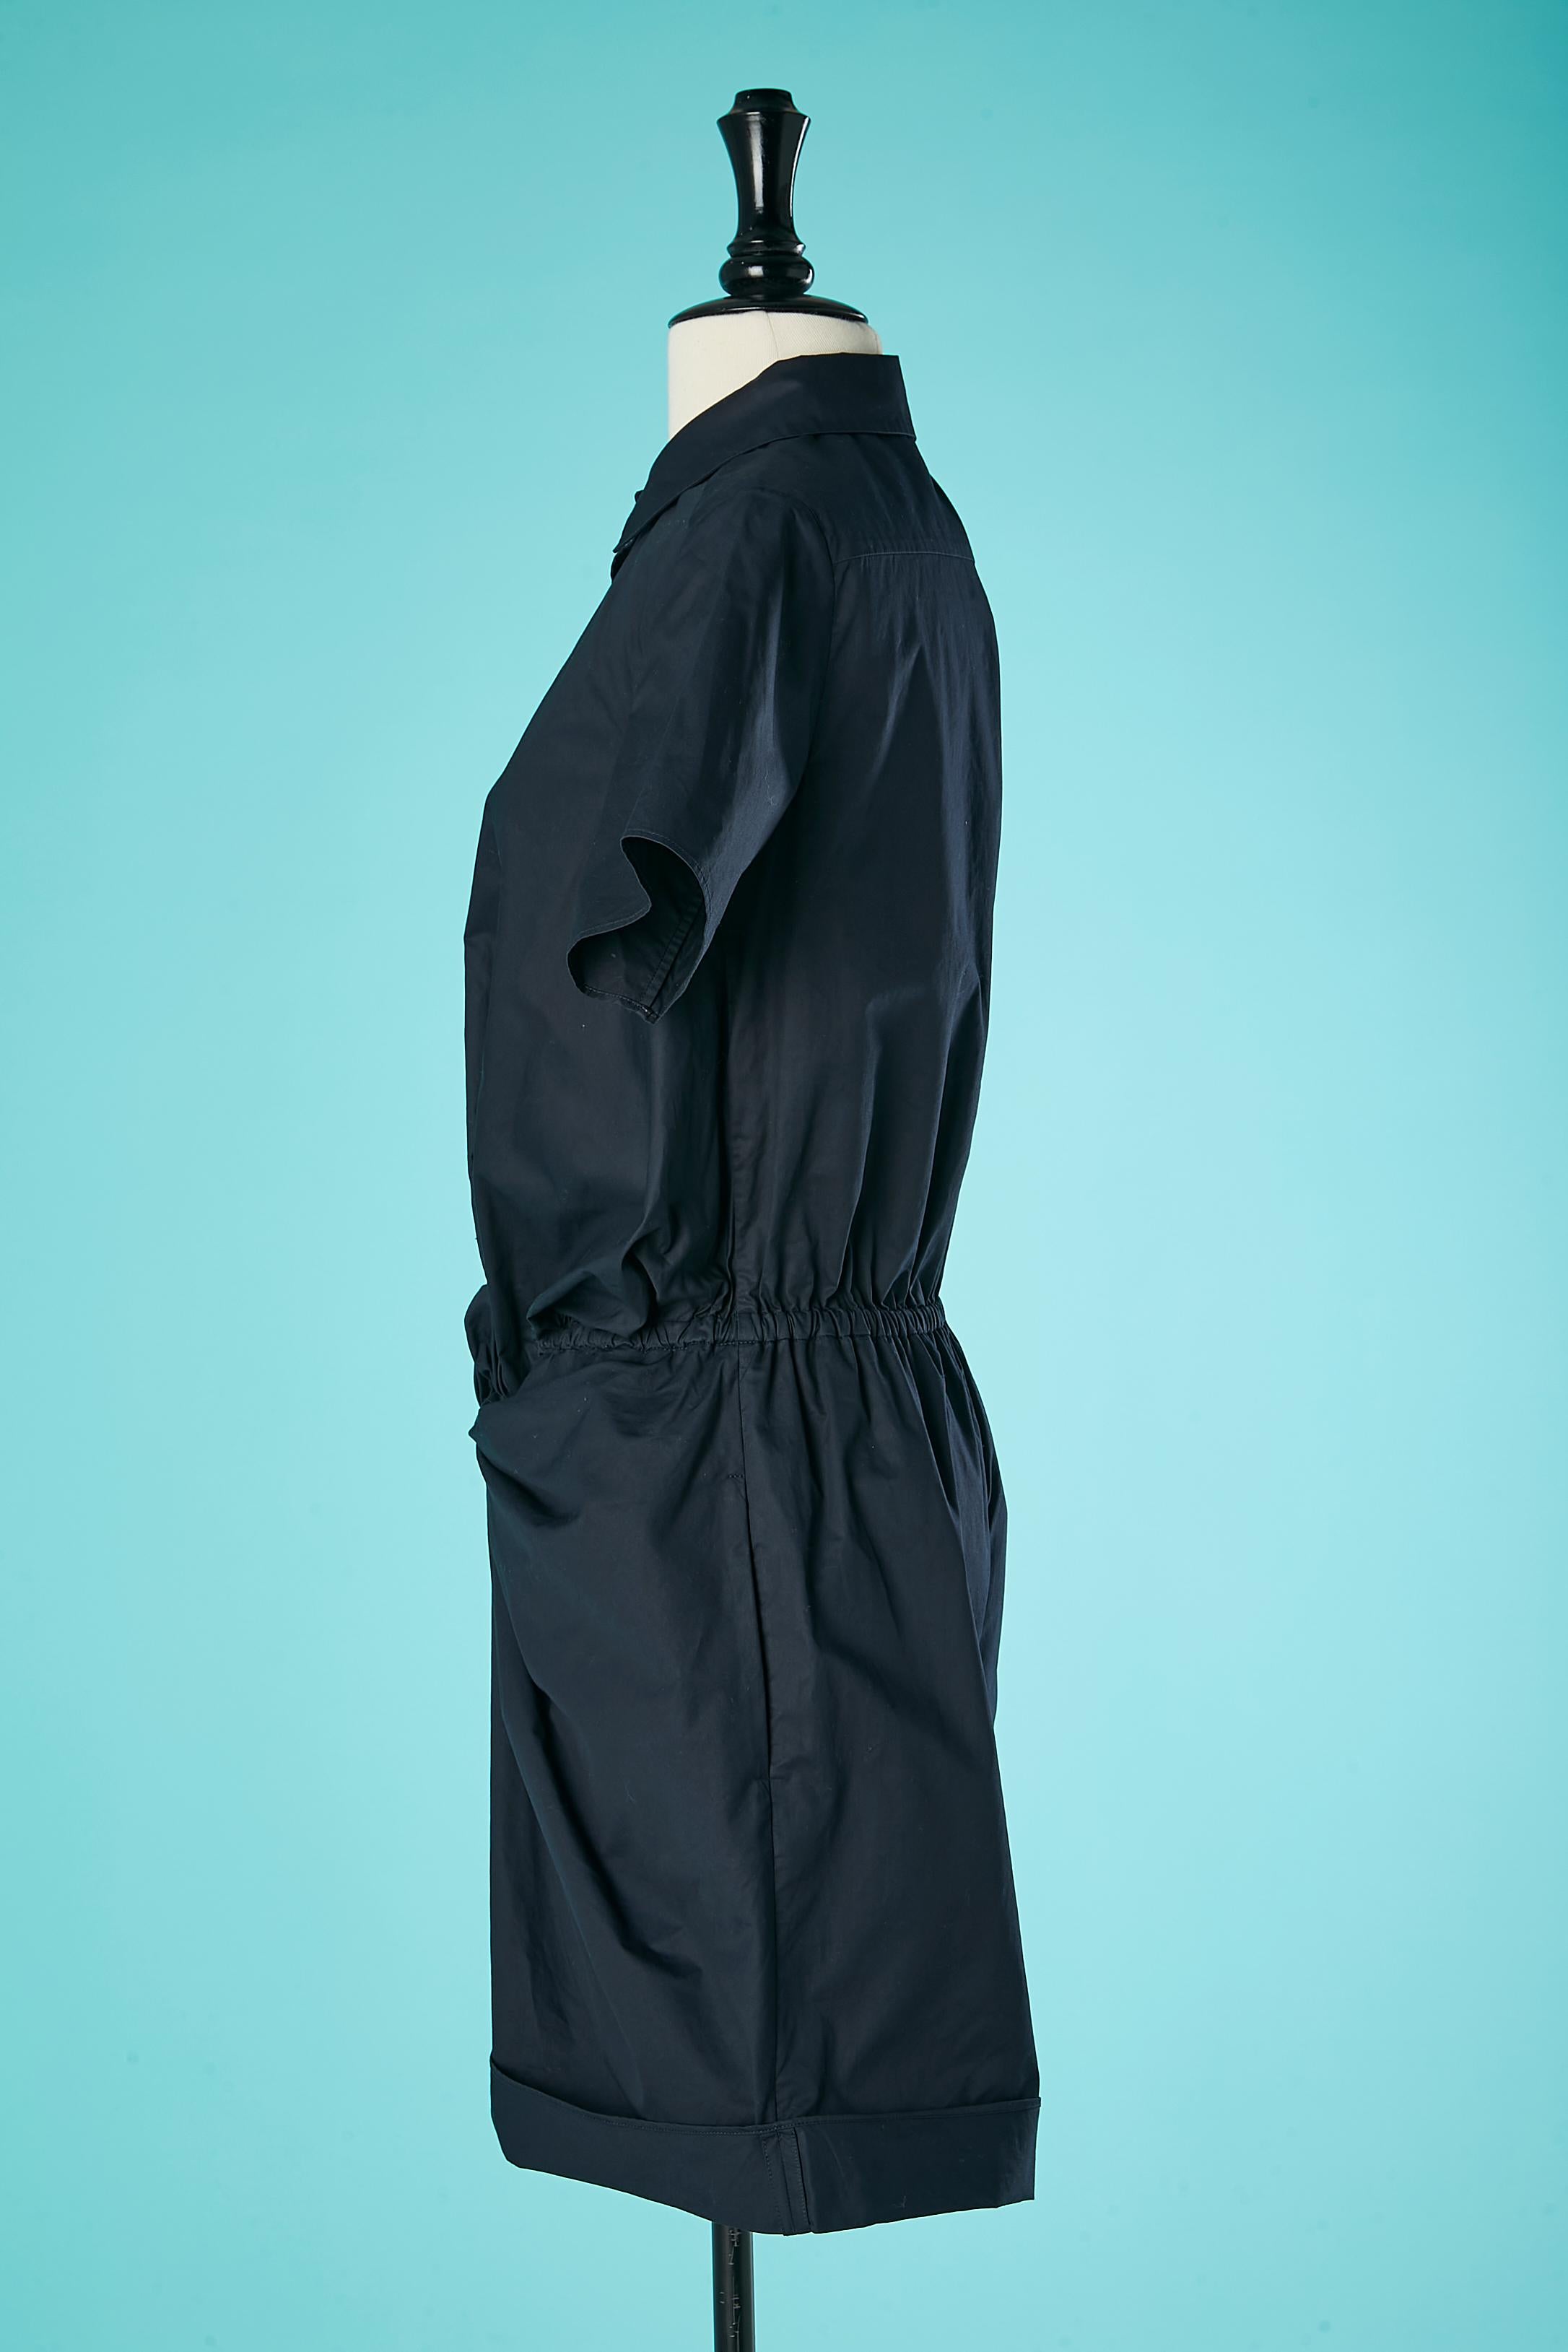 Navy cotton short-jumpsuit twisted and draped Carven by Guillaume Henry  In Excellent Condition For Sale In Saint-Ouen-Sur-Seine, FR